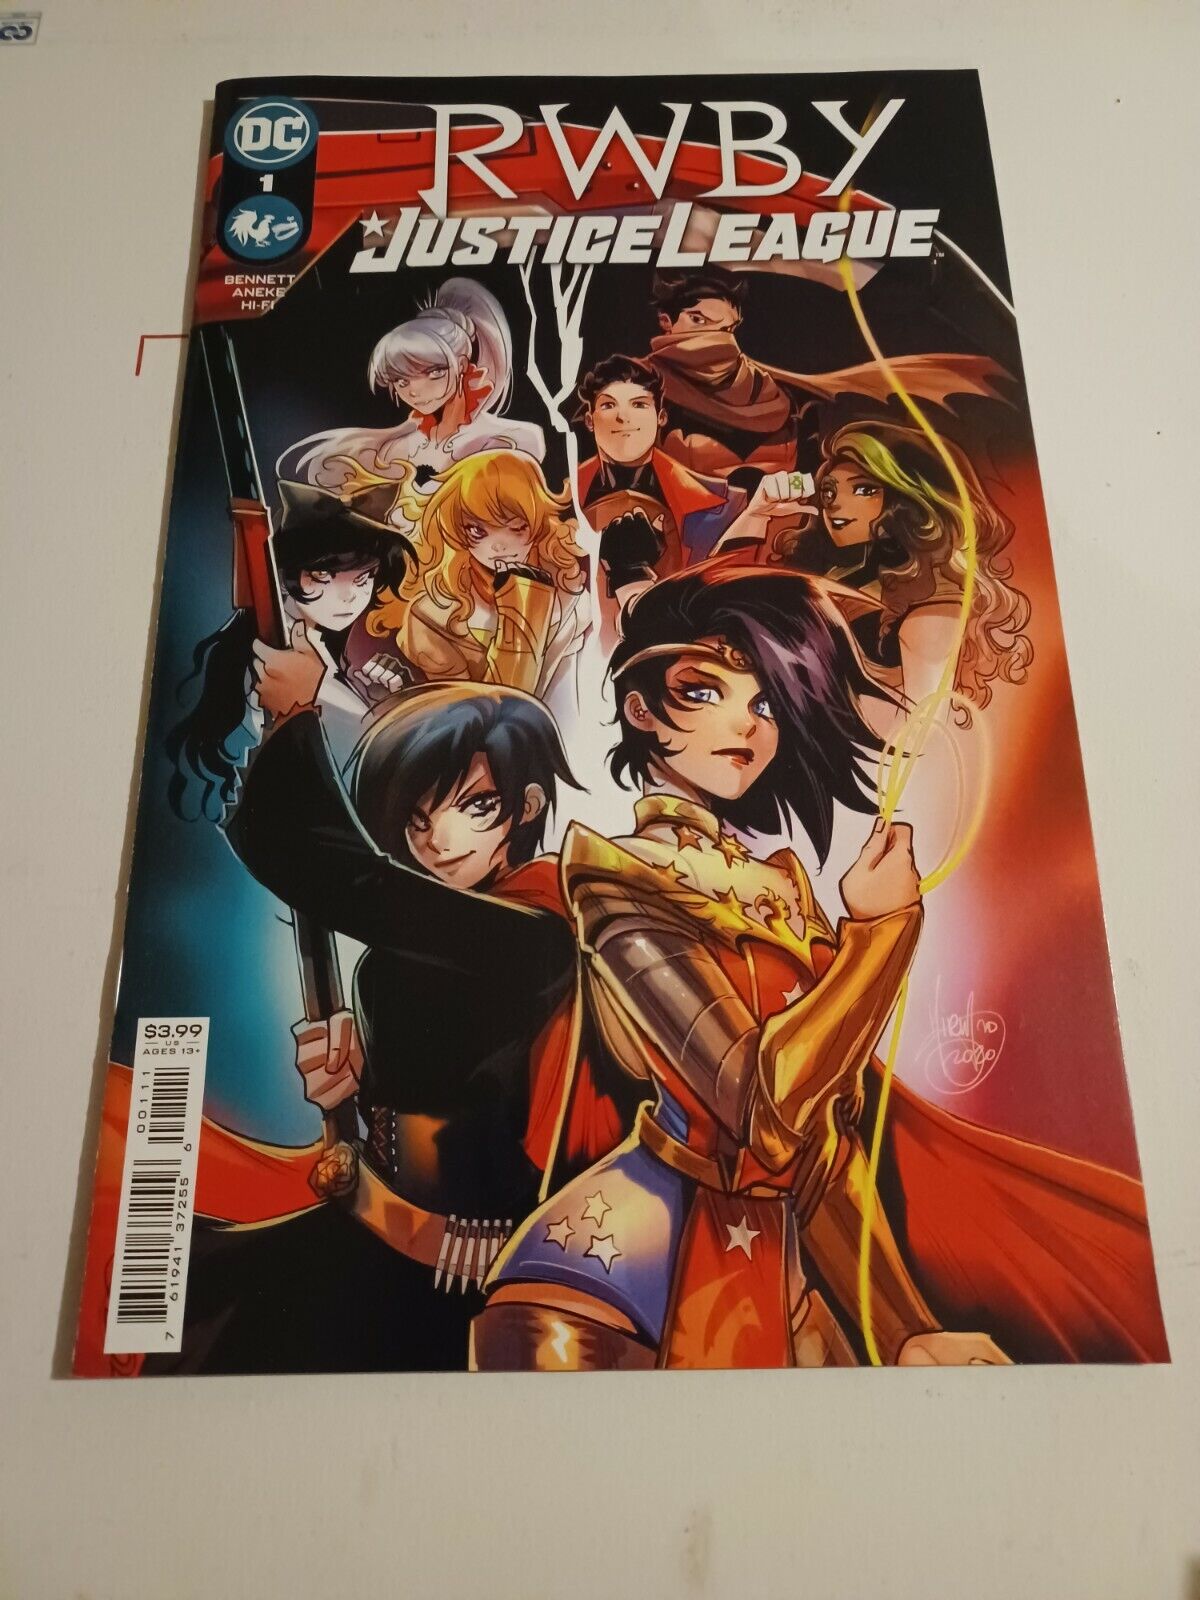 RWBY Justice League #1 COVER A NM OR BETTER